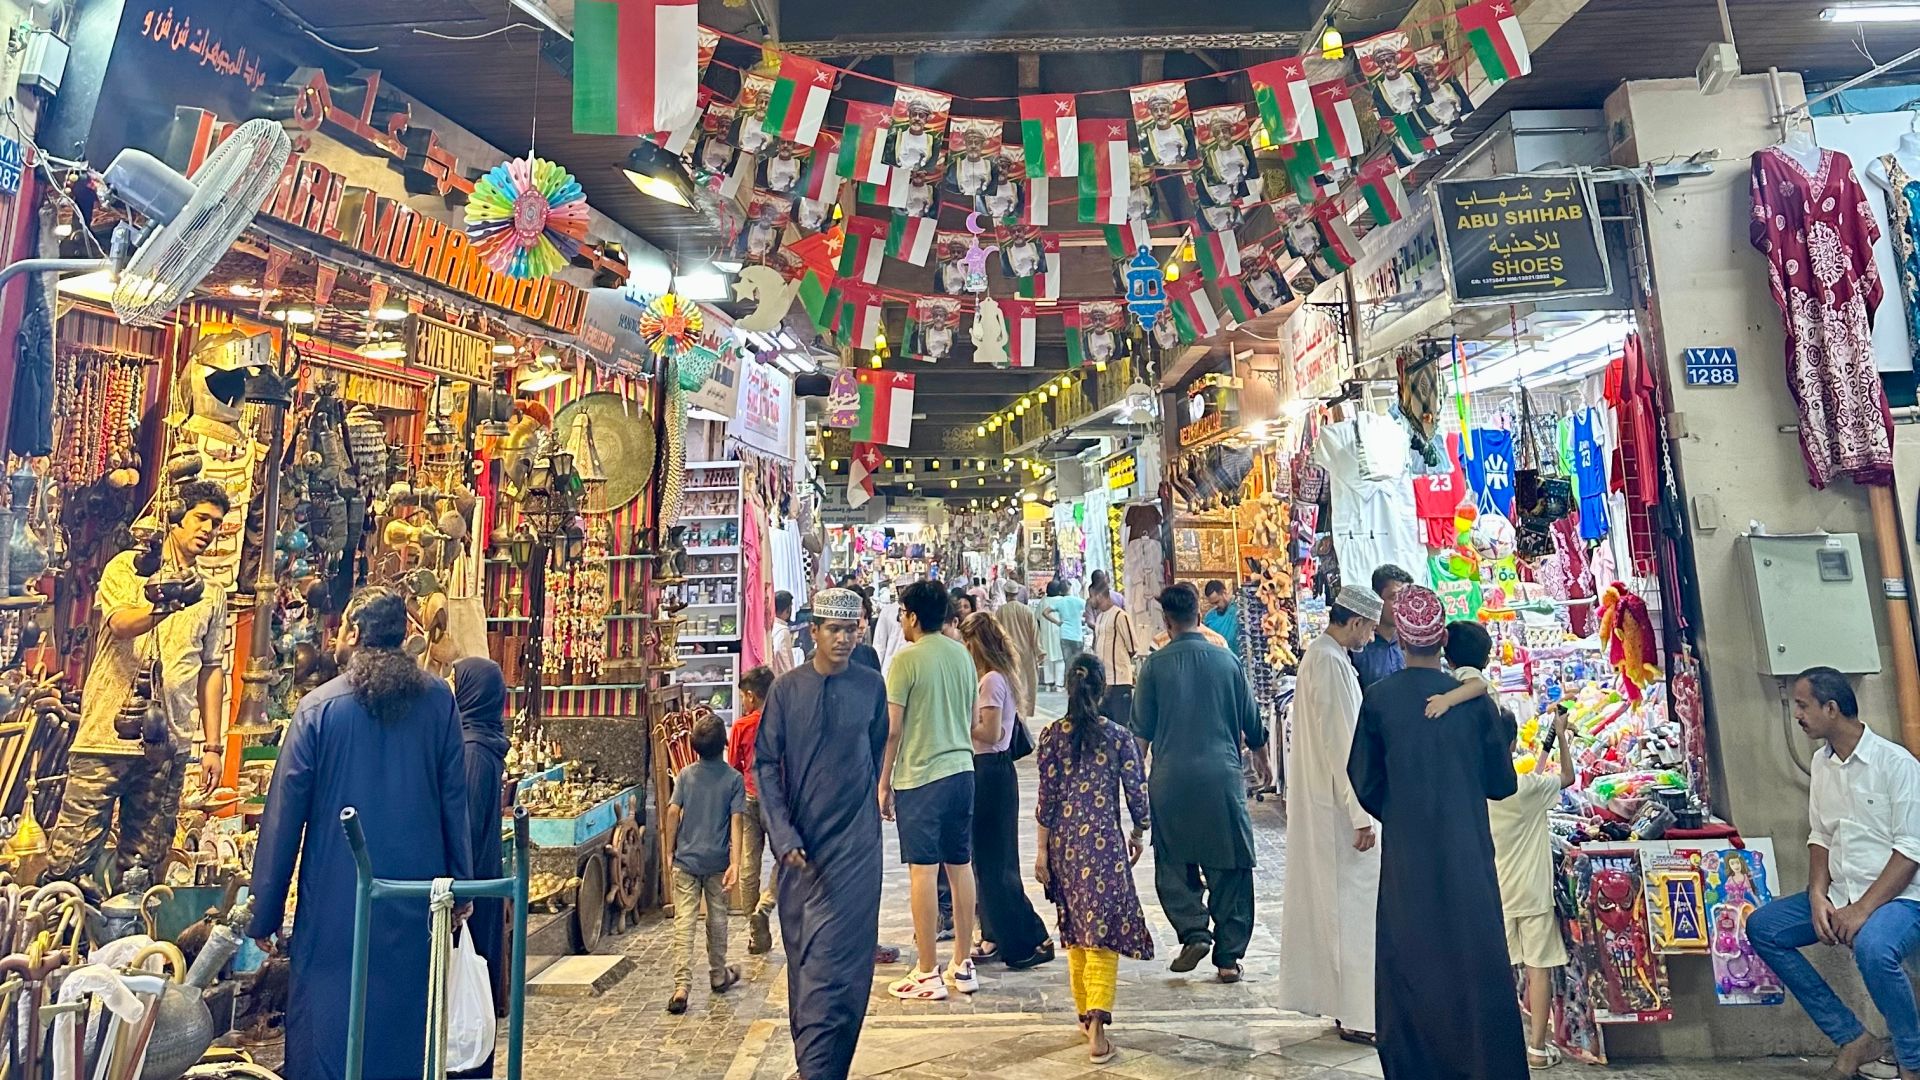 A busy evening in Oman's Muttrah souq